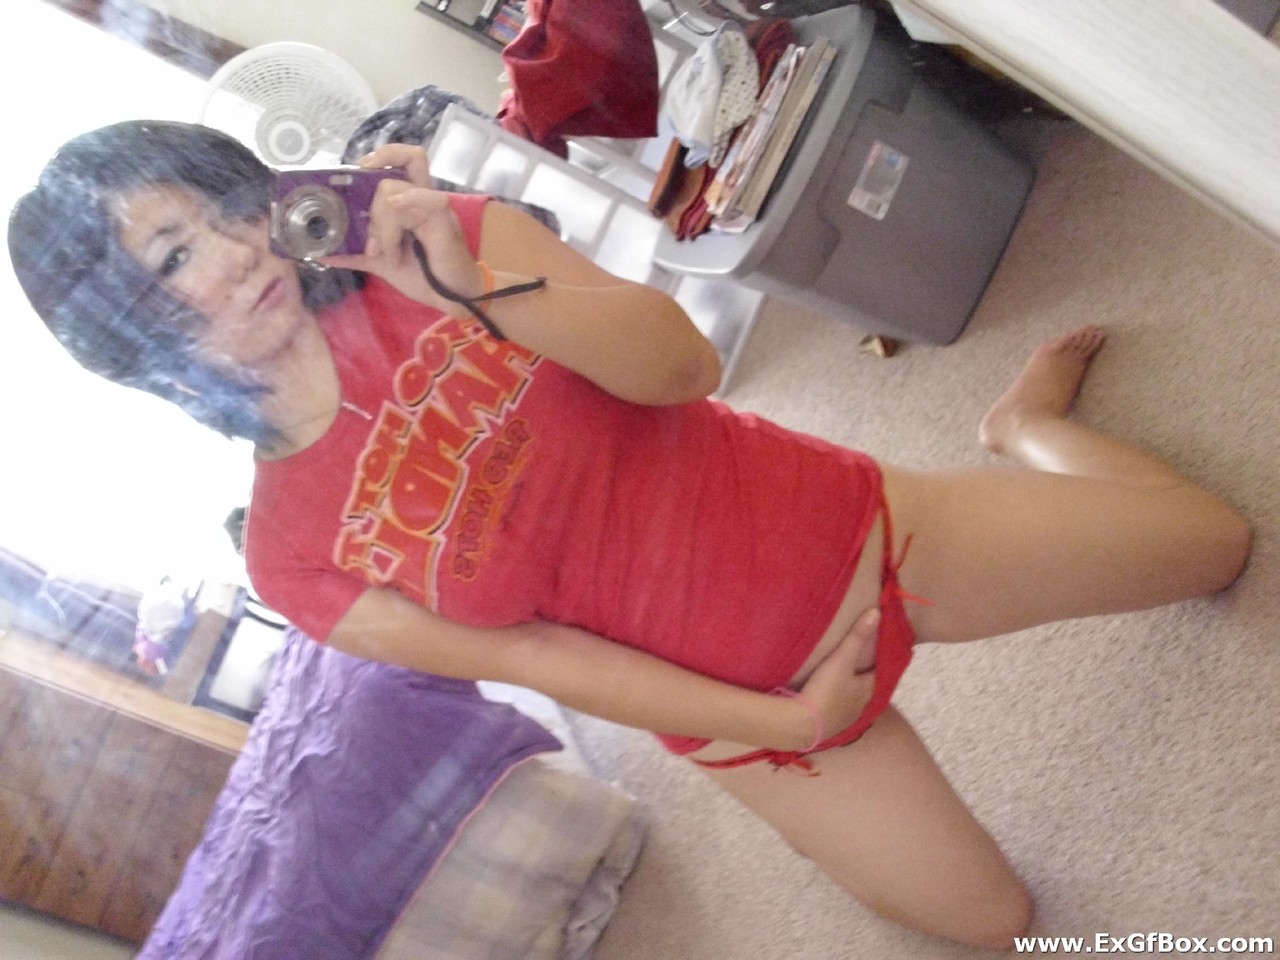 Bootylicious teenage girlfriend takes selfies of her hot body while stripping photo porno #426010454 | Ex GF Box Pics, Selfie, porno mobile